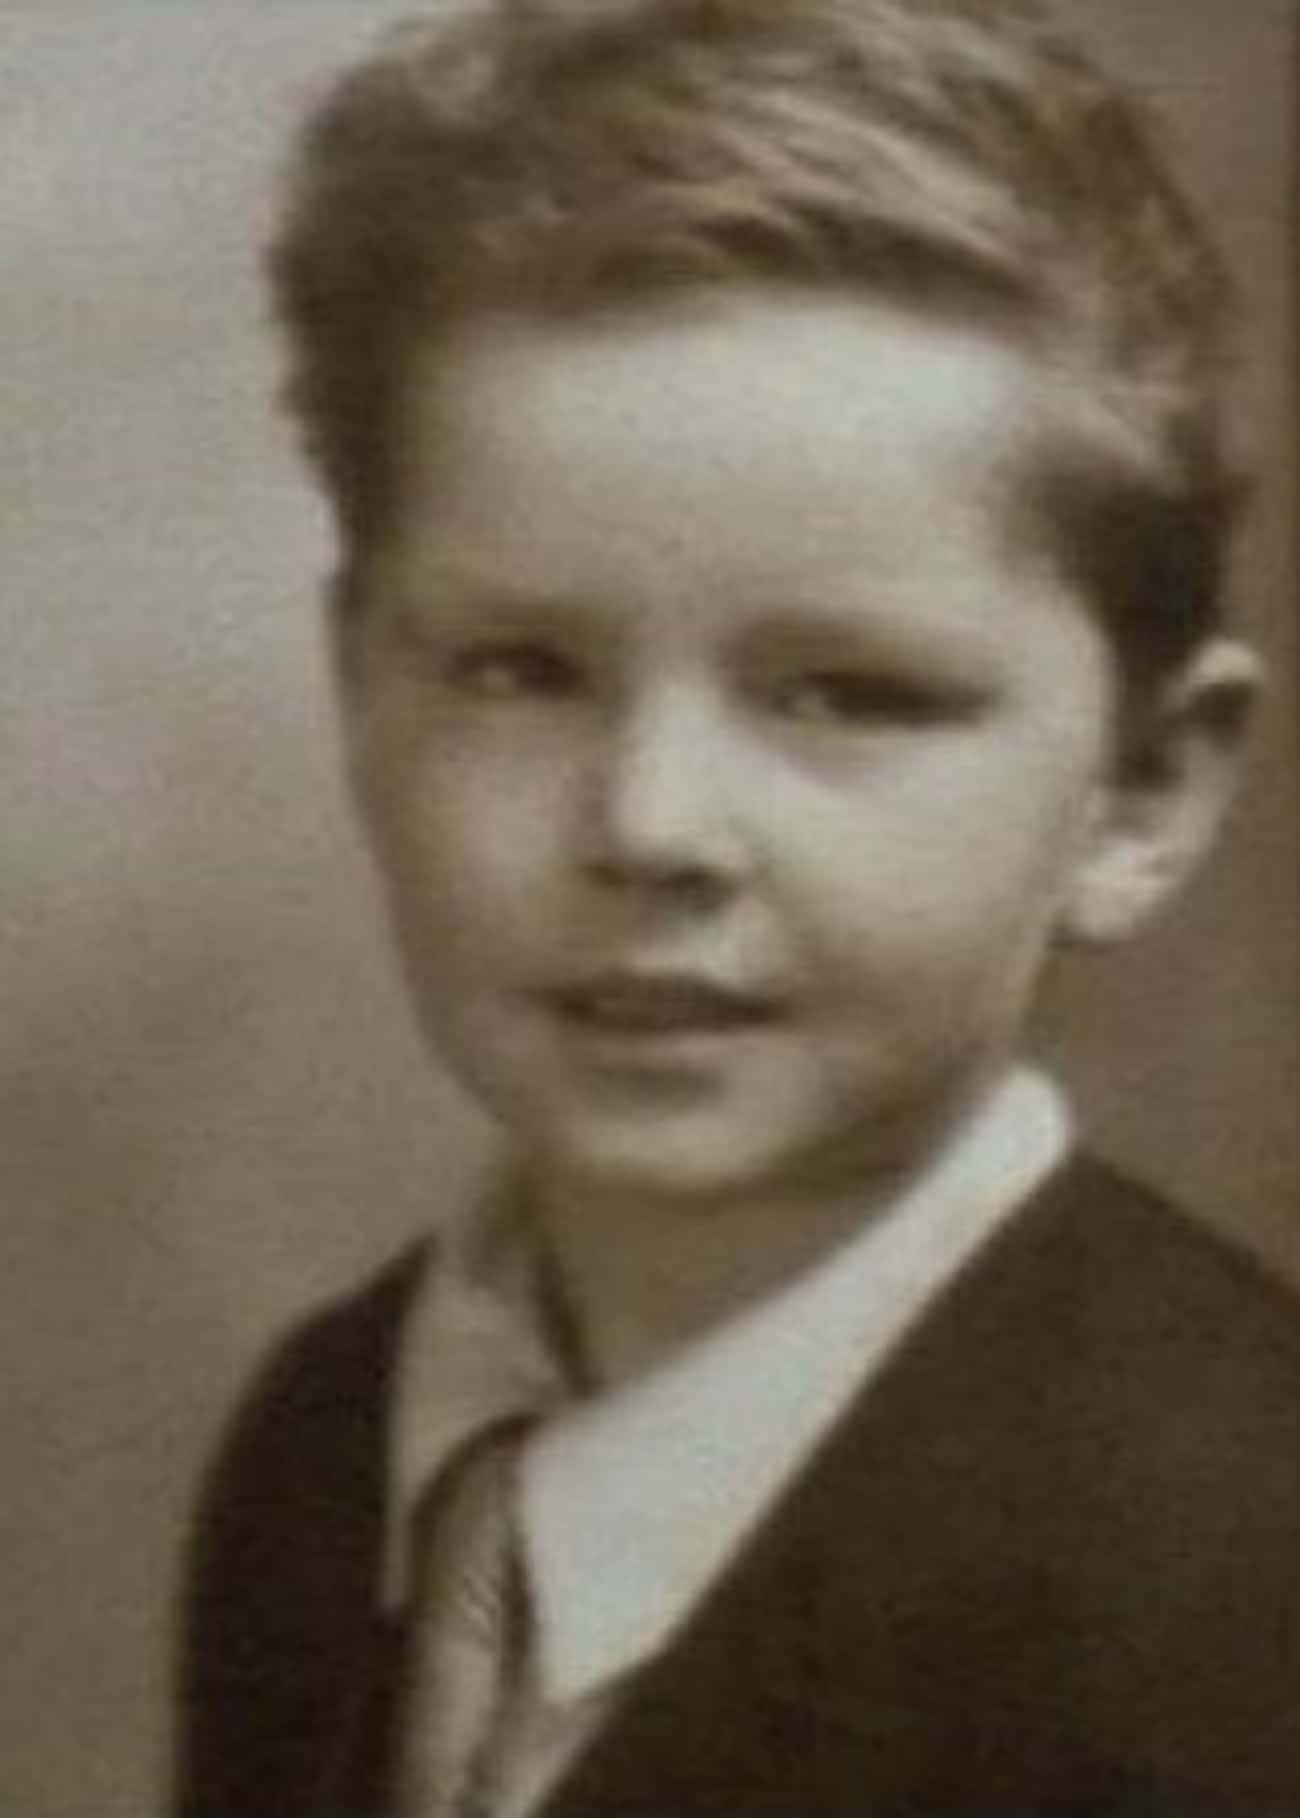 Young Jack Nicholson as Child